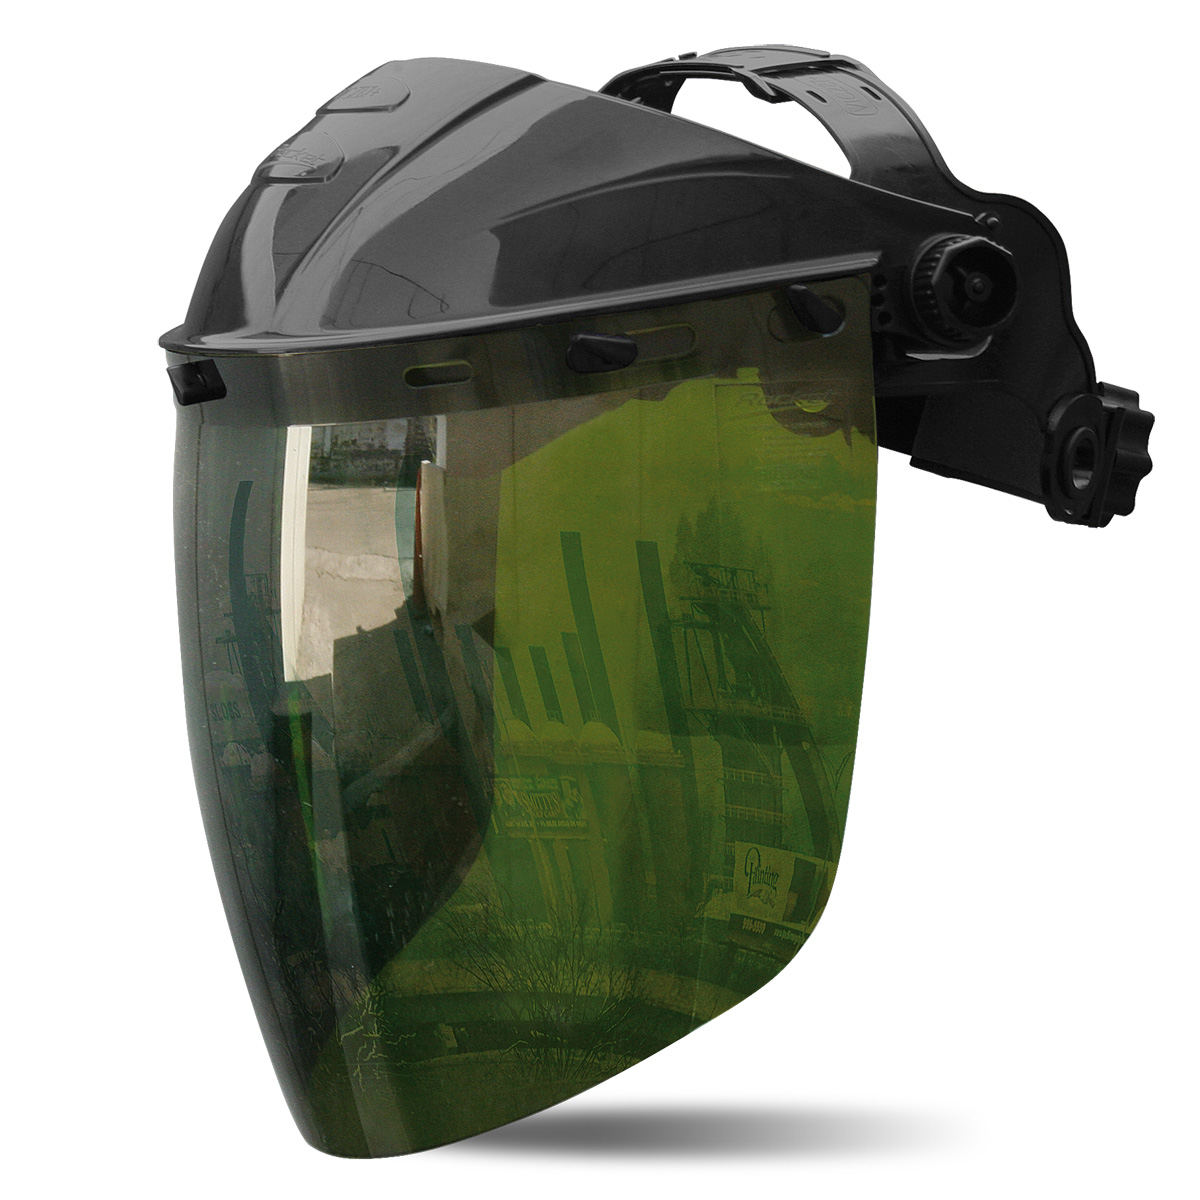 2188-VRV5 Eye Protection Face shield Visor made of 2.25 mm thick polycarbonate, with high mechanical and chemicalresistance. Protection against particle impacts at high speed and at extreme temperatures (BT), and for splashes of molten metals and hot solids (9). Wide field of vision (180 °), with curved structure (better impact behavior) and protection to the chin, with excellent optical quality (Class 1). Protection against radiation Infrared IR tone 5.0for welding processes.